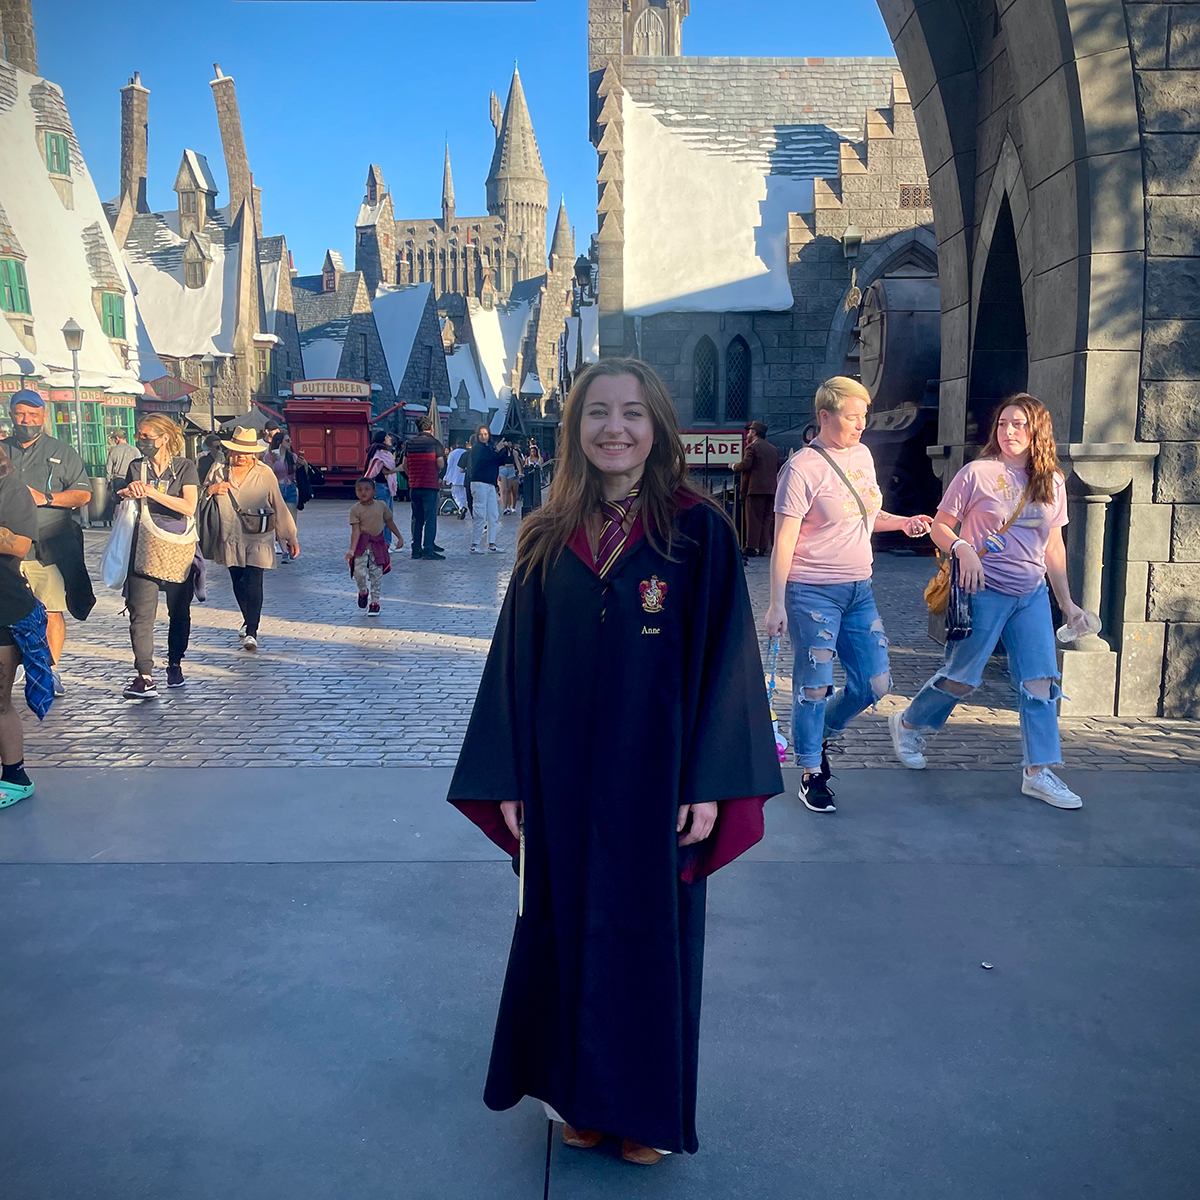 Annie standing in the middle of a street in the Hogwarts exhibit at Universal Studios, California.